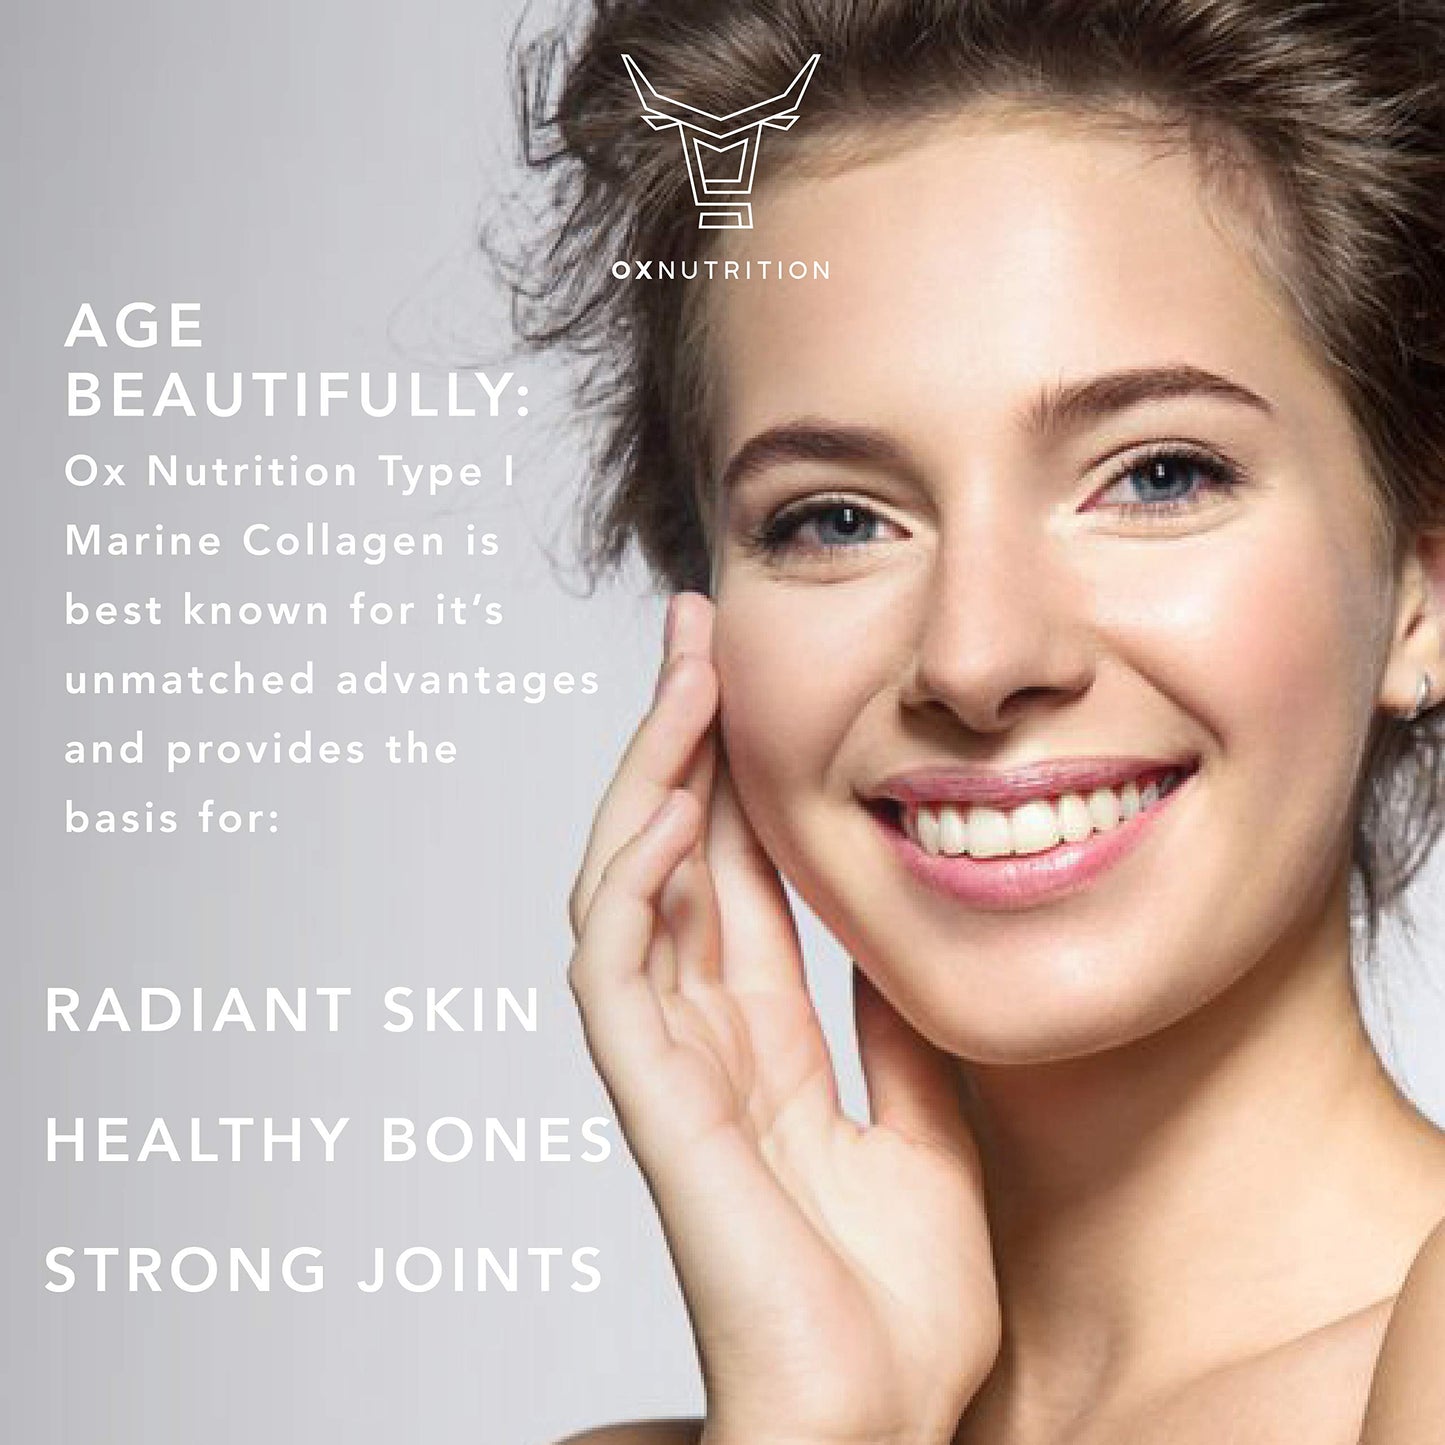 Revitalize Your Health with OXNUTRITION Wild-Caught Marine Collagen